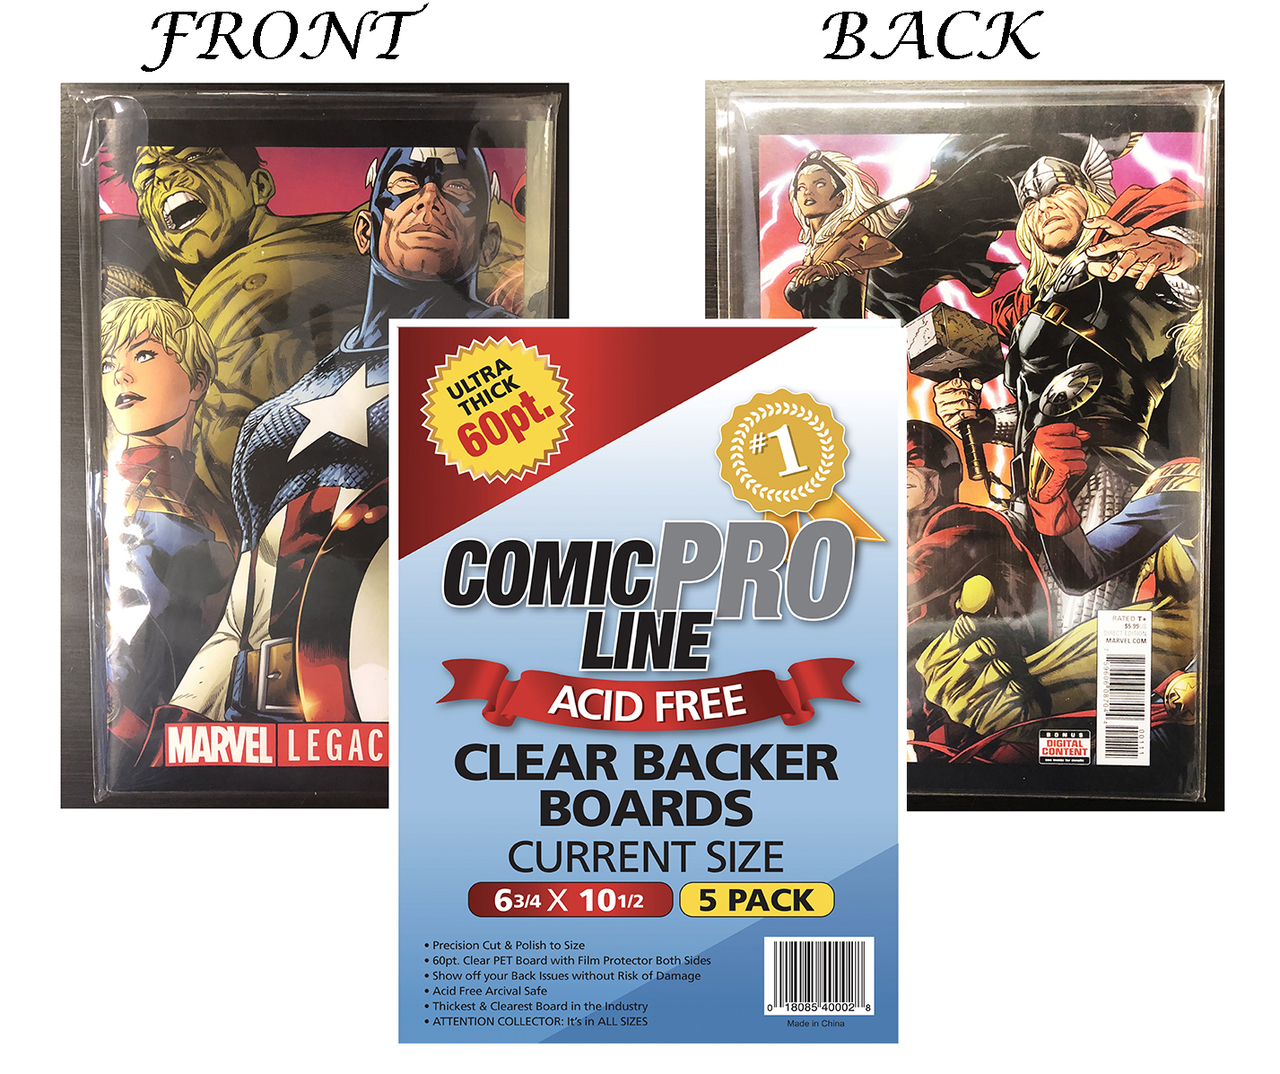 Comic Pro Line Clear Backer Boards Current Size 60Pt